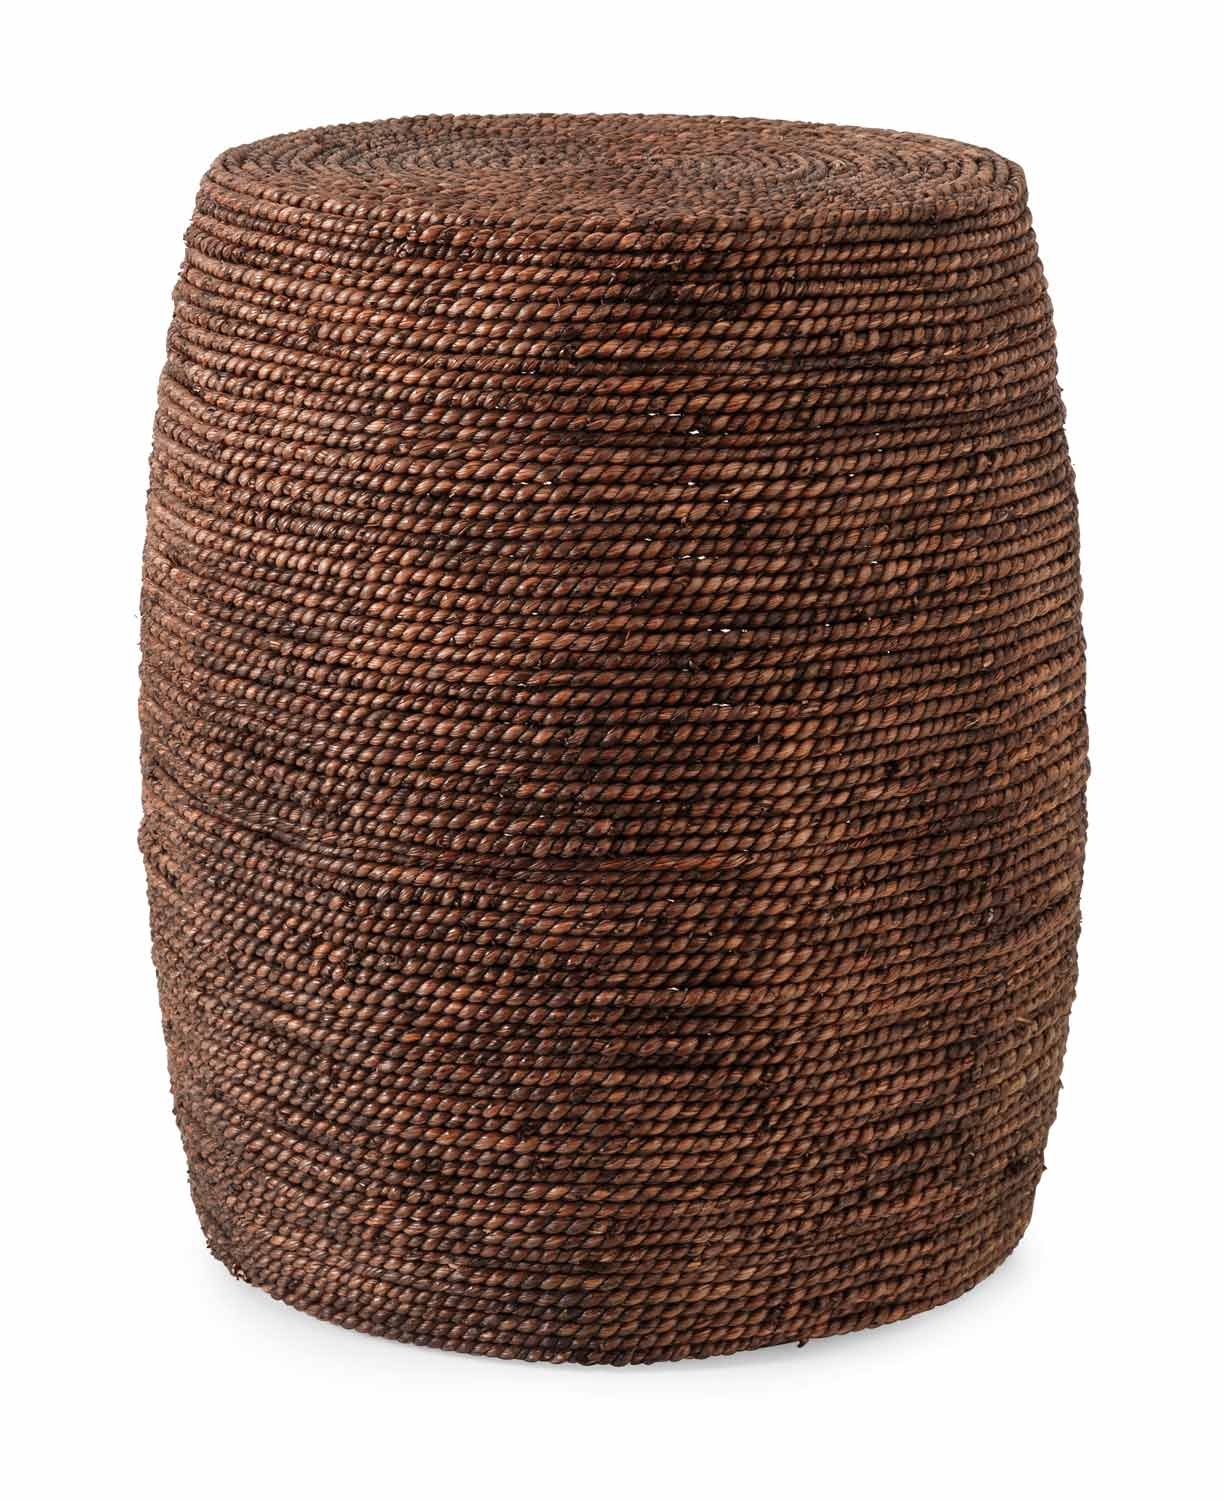 19" African Inspired Woven Elm and Seagrass Warm Honey Brown Ottoman